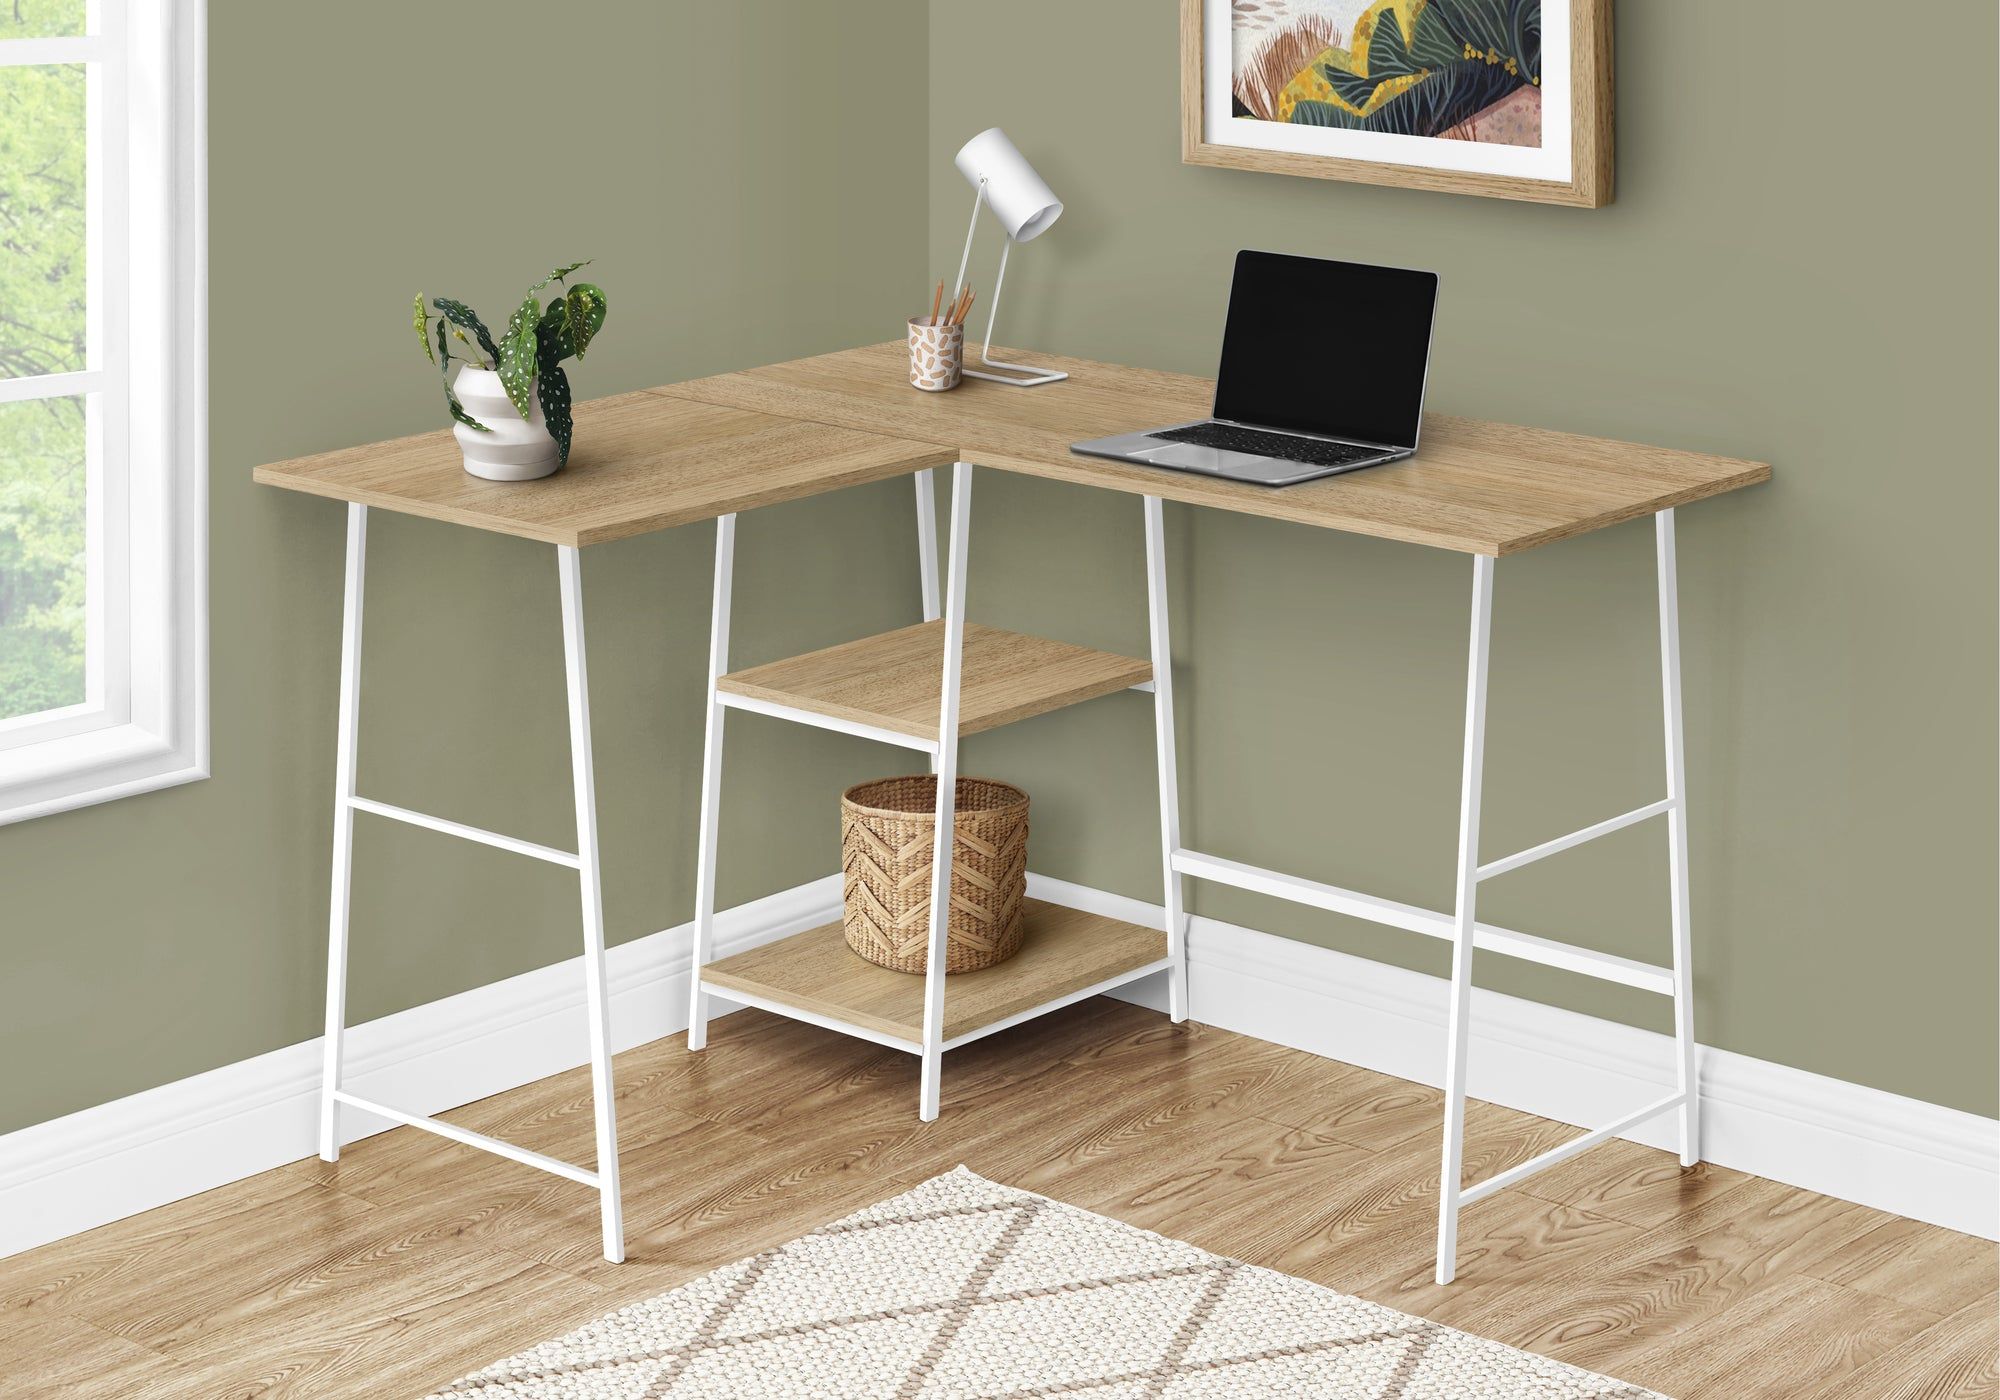 Compact and Functional: The Charm of a Small Corner Computer Desk with Drawers